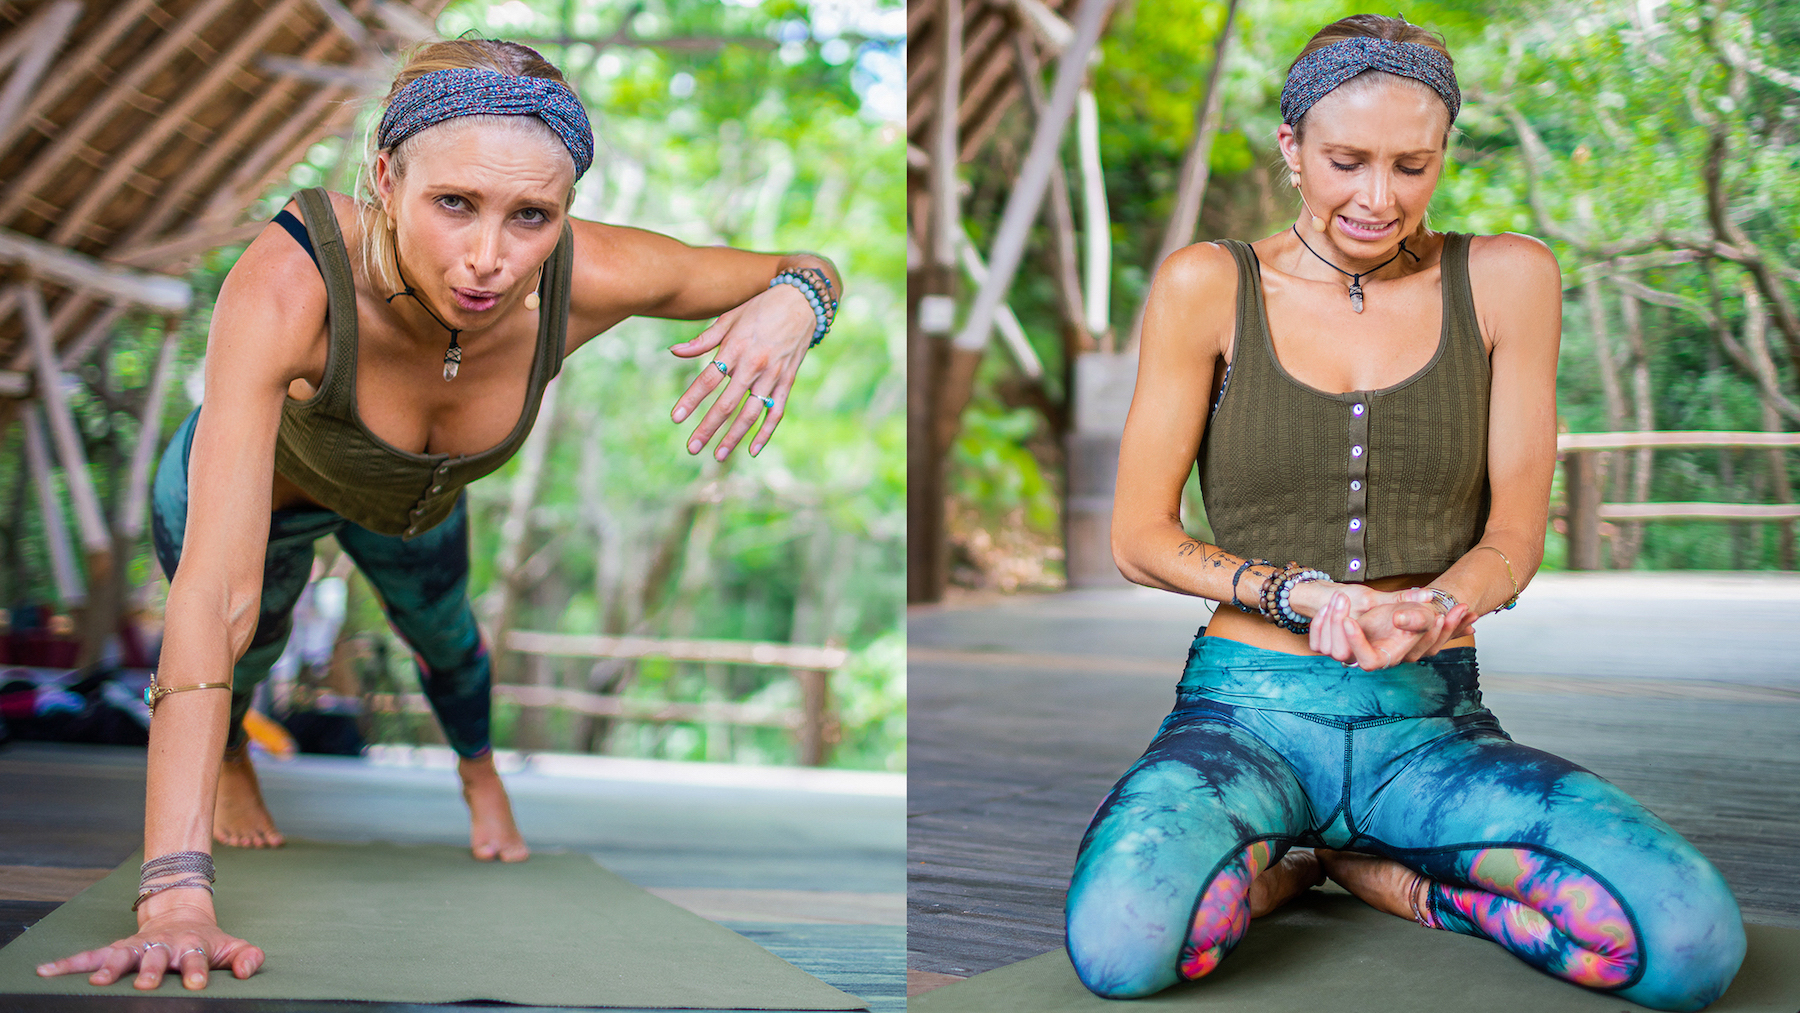 How To Deal With Wrist Pain During Yoga & Workouts - Boho Beautiful